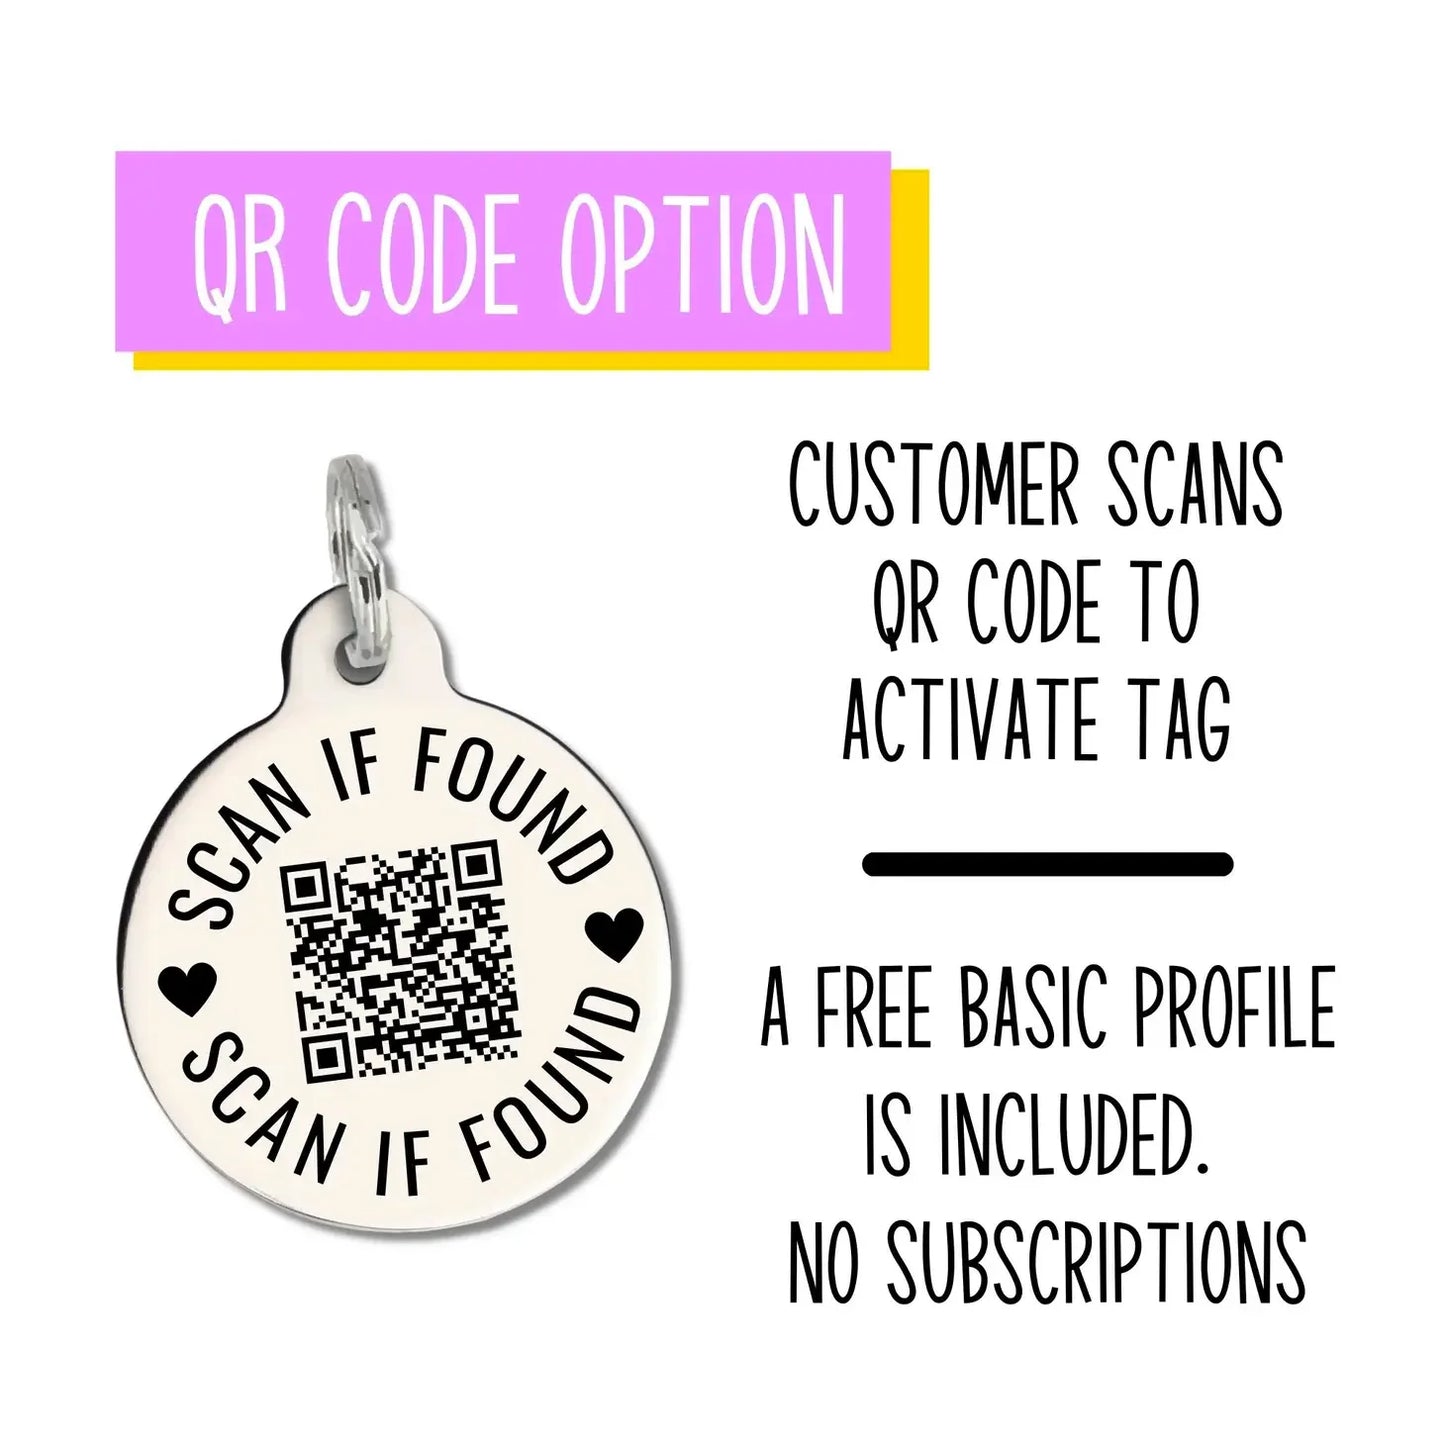 Mama's Main Squeeze - QR Code ID Tag